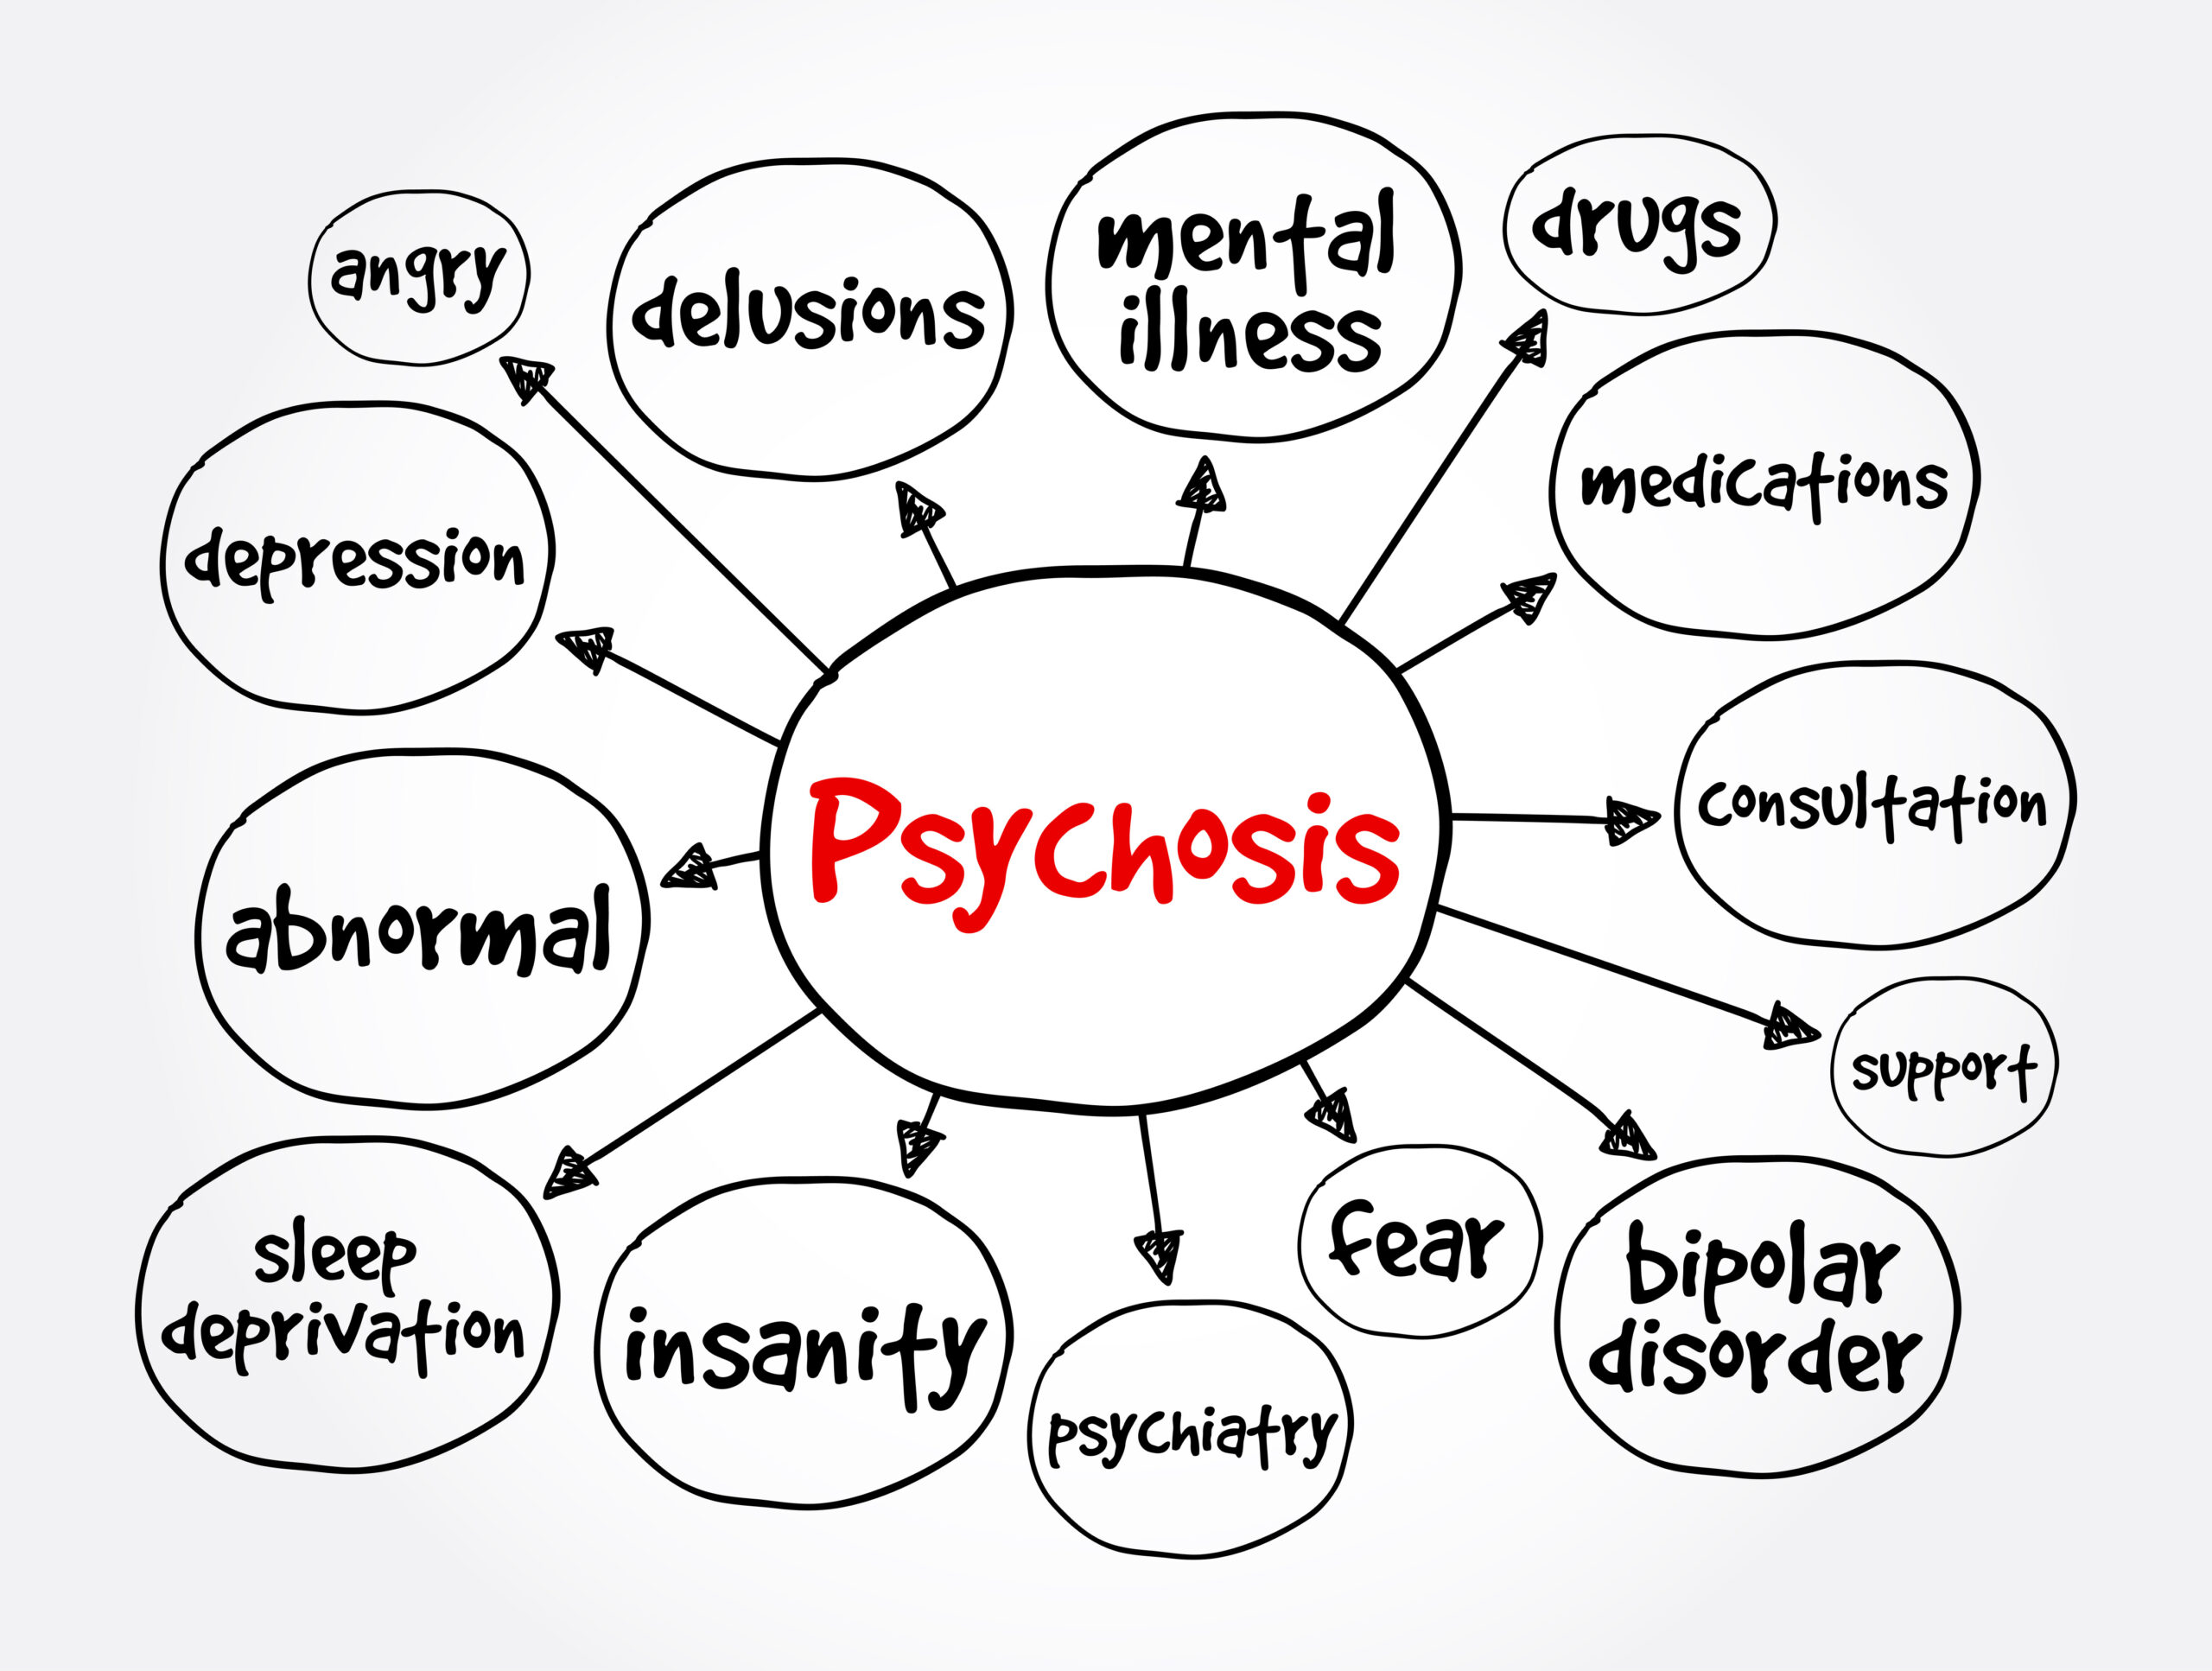 Diagram with psychosis in the middle and symptoms as offshoots. 